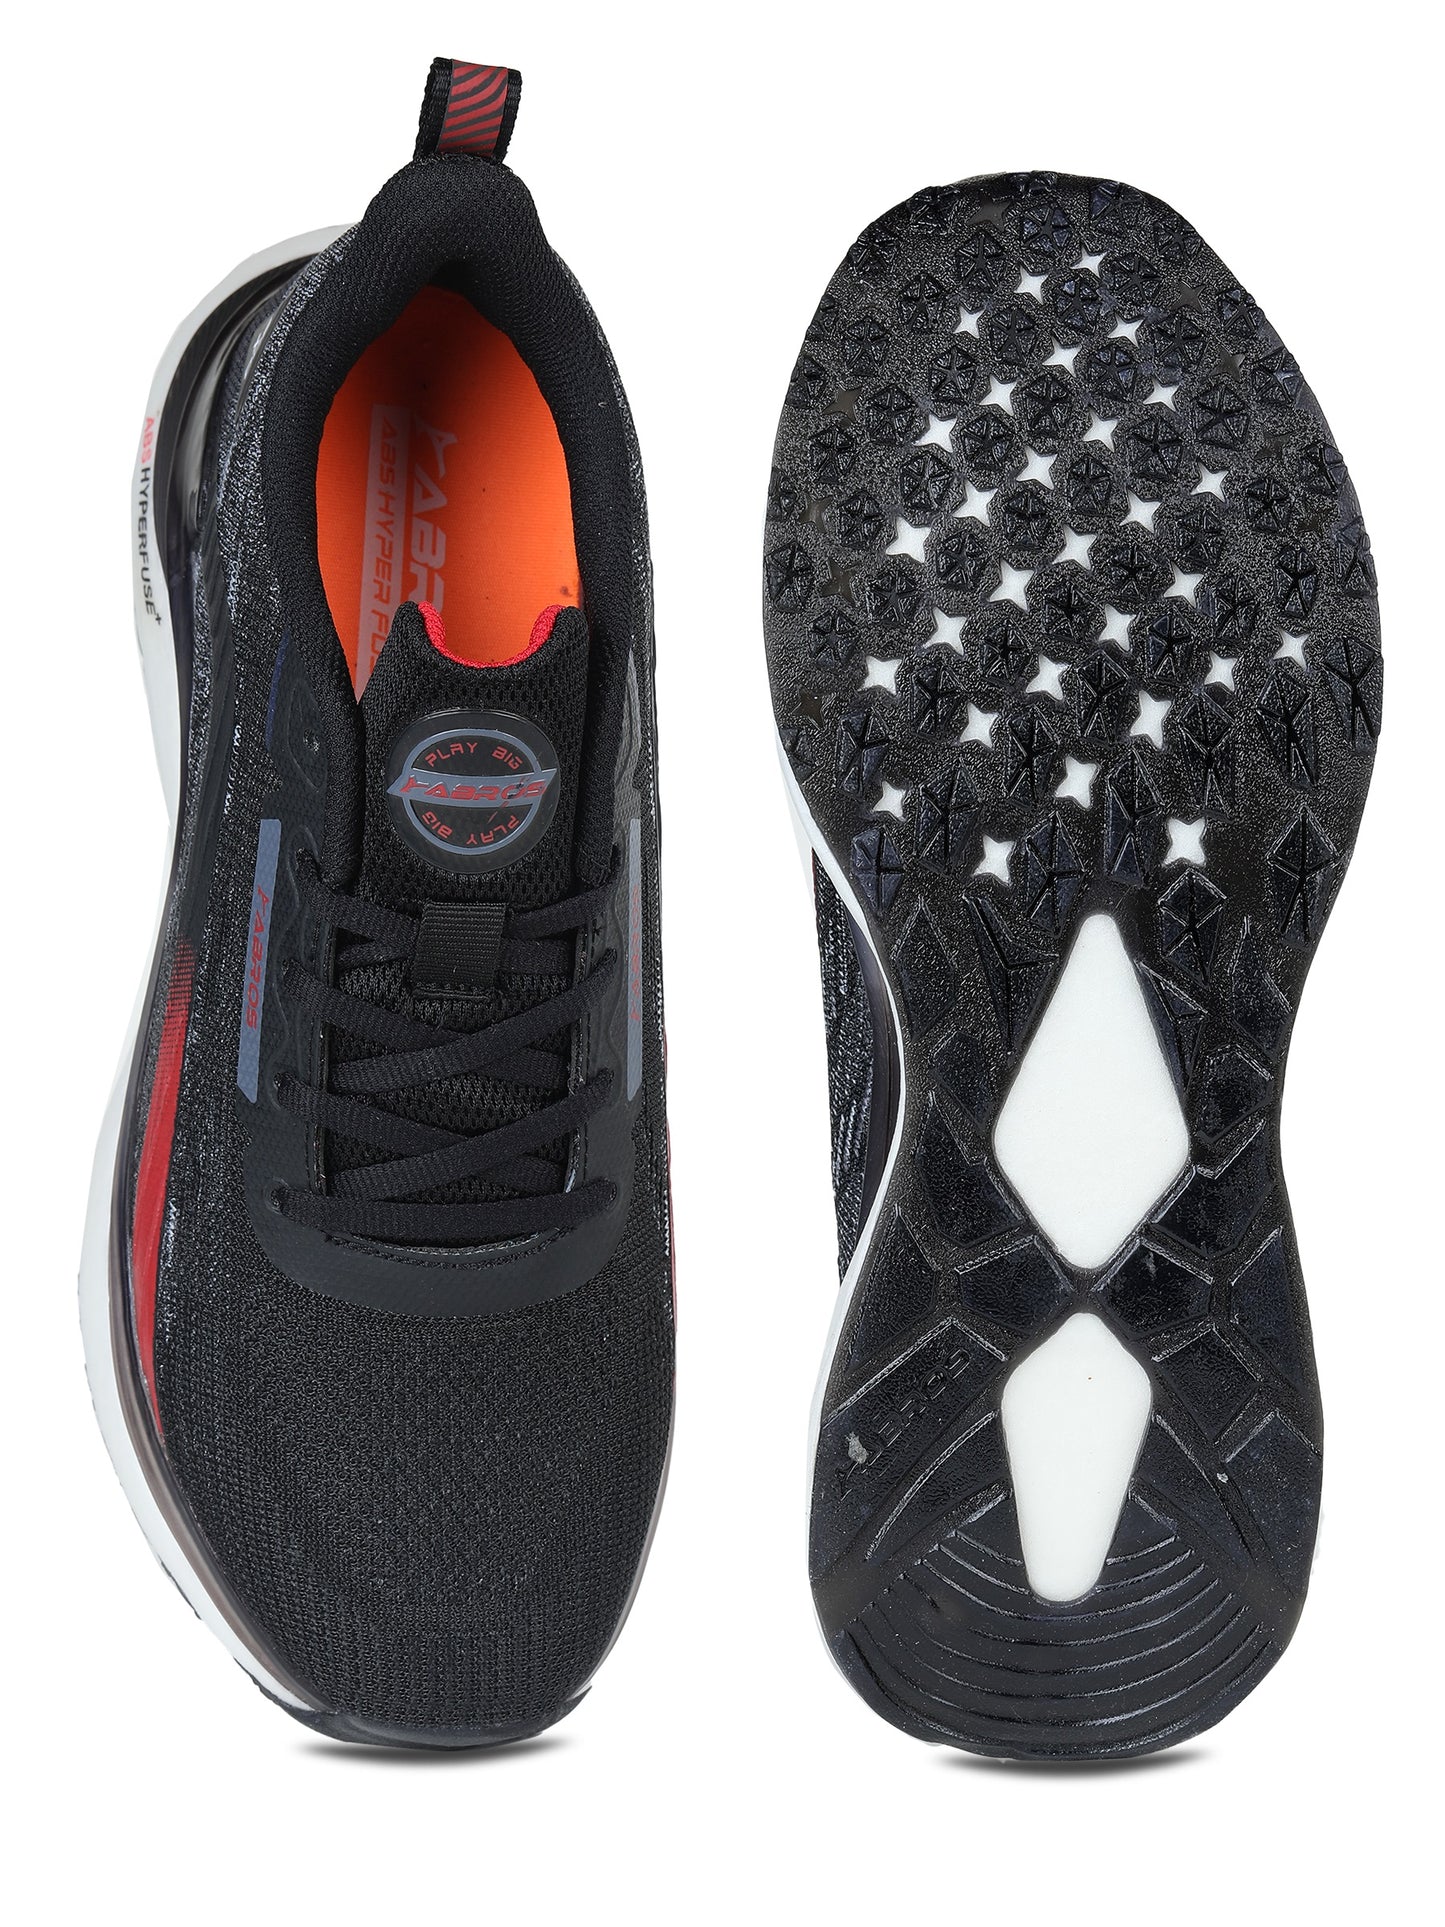 ABROS SLEDGE Sports shoes For Men's